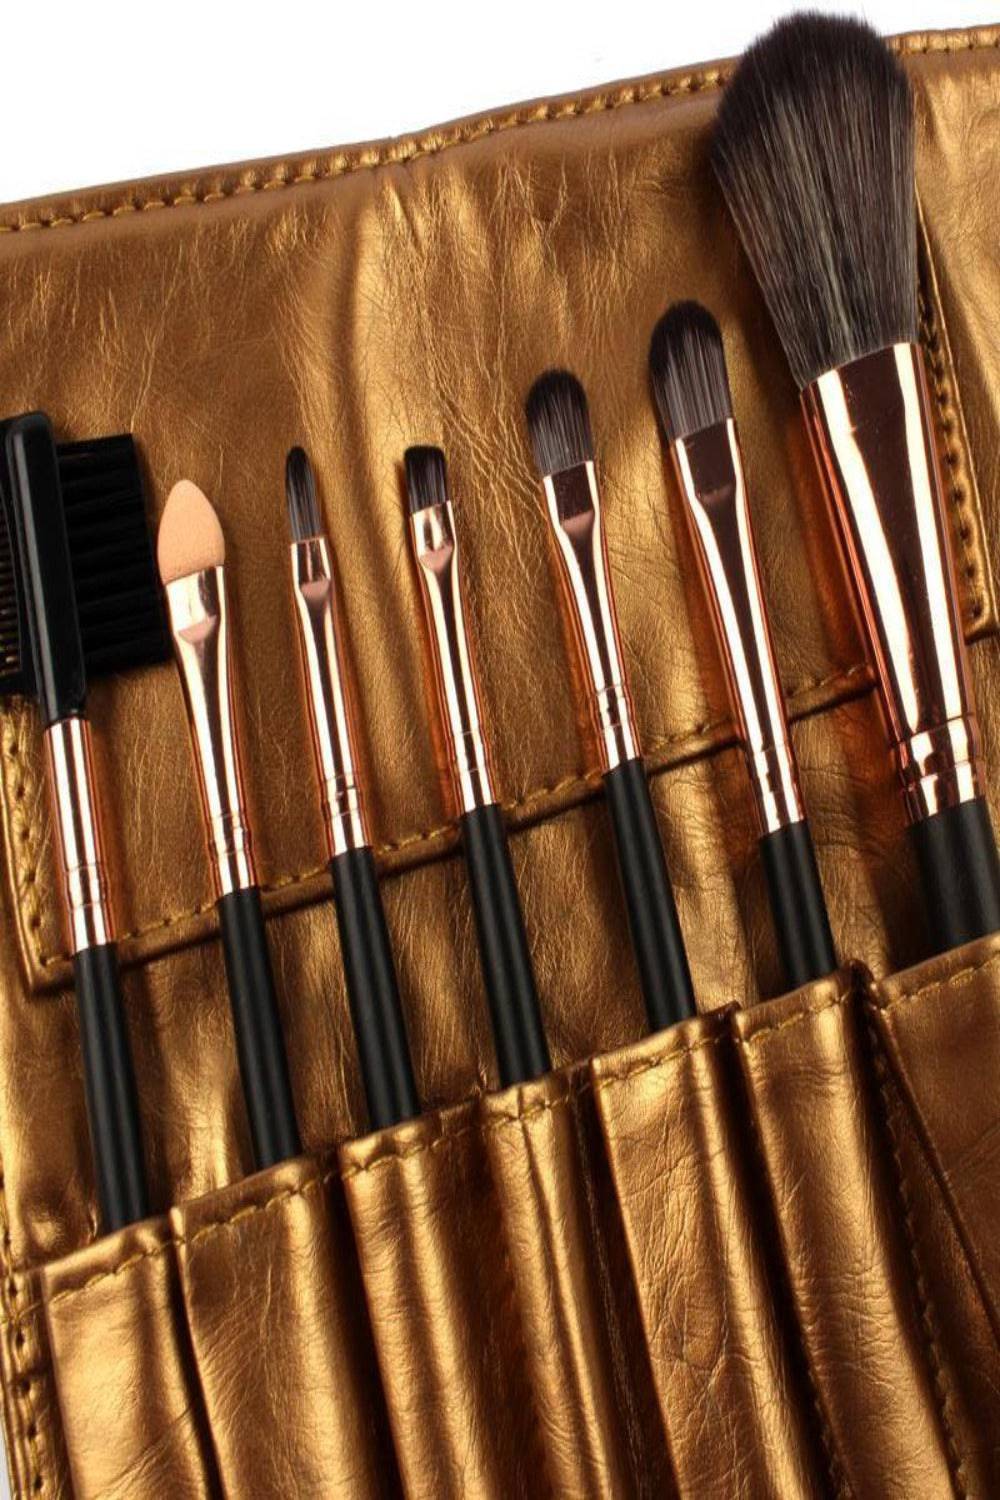 Golden Breeze Essential Makeup Brush Set With Gold Faux Leather Case - 7 Pack - TGC Boutique - Makeup Brushes